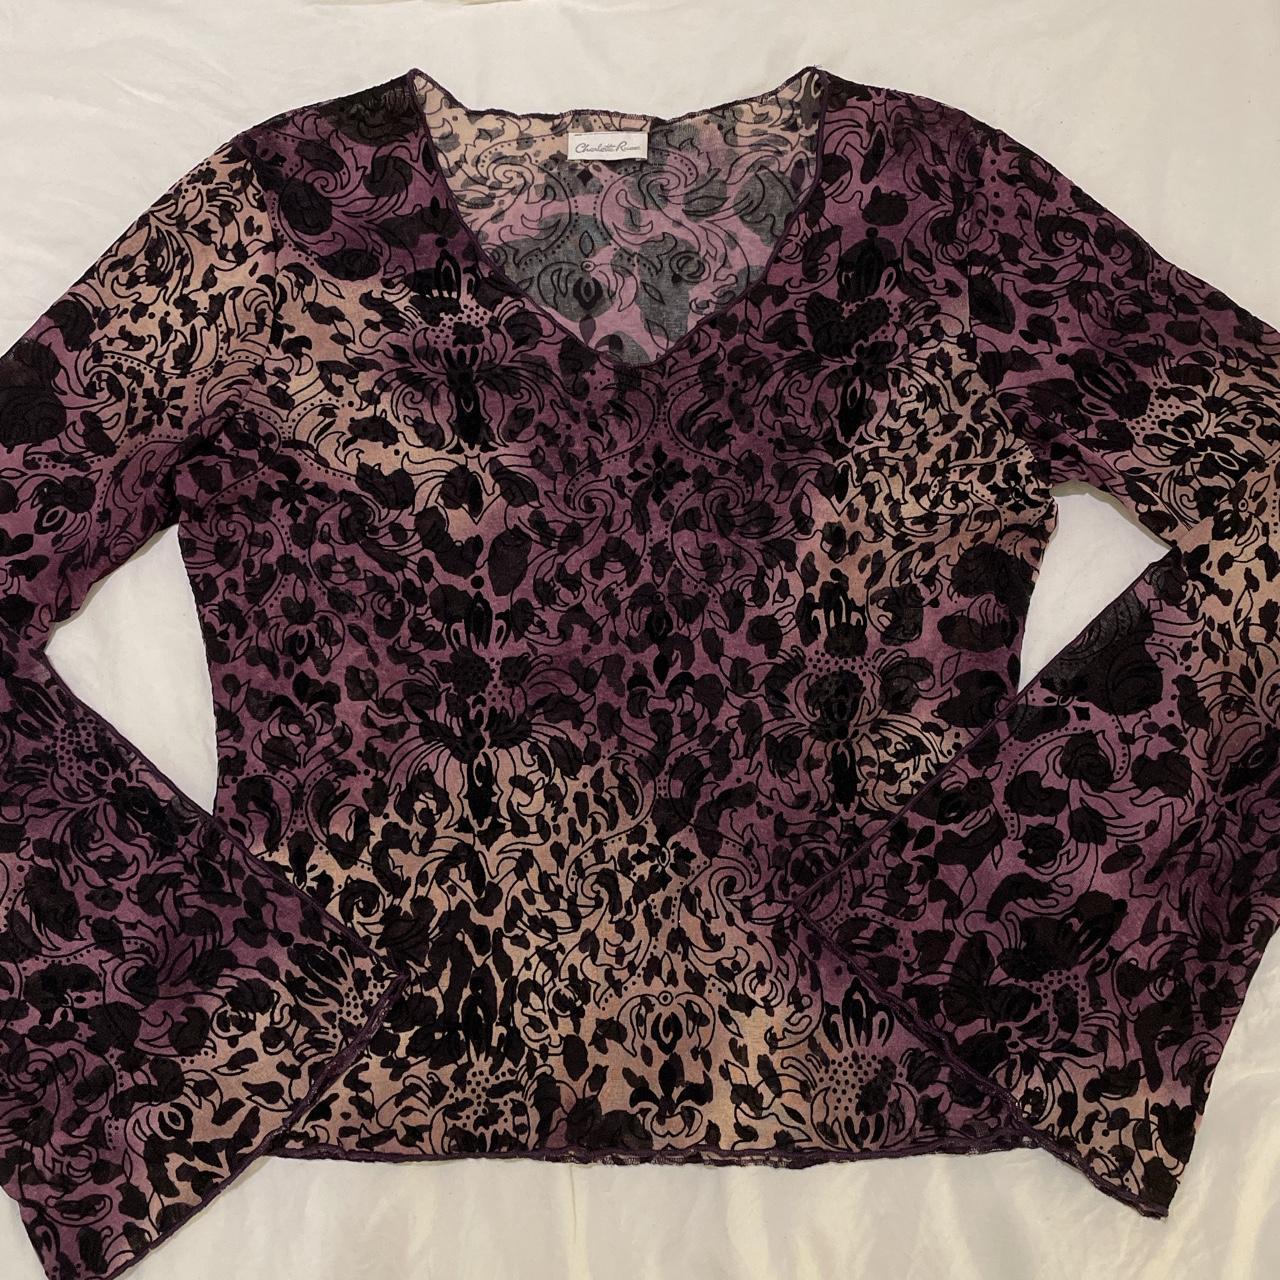 Charlotte Russe Women's Purple and Black Blouse